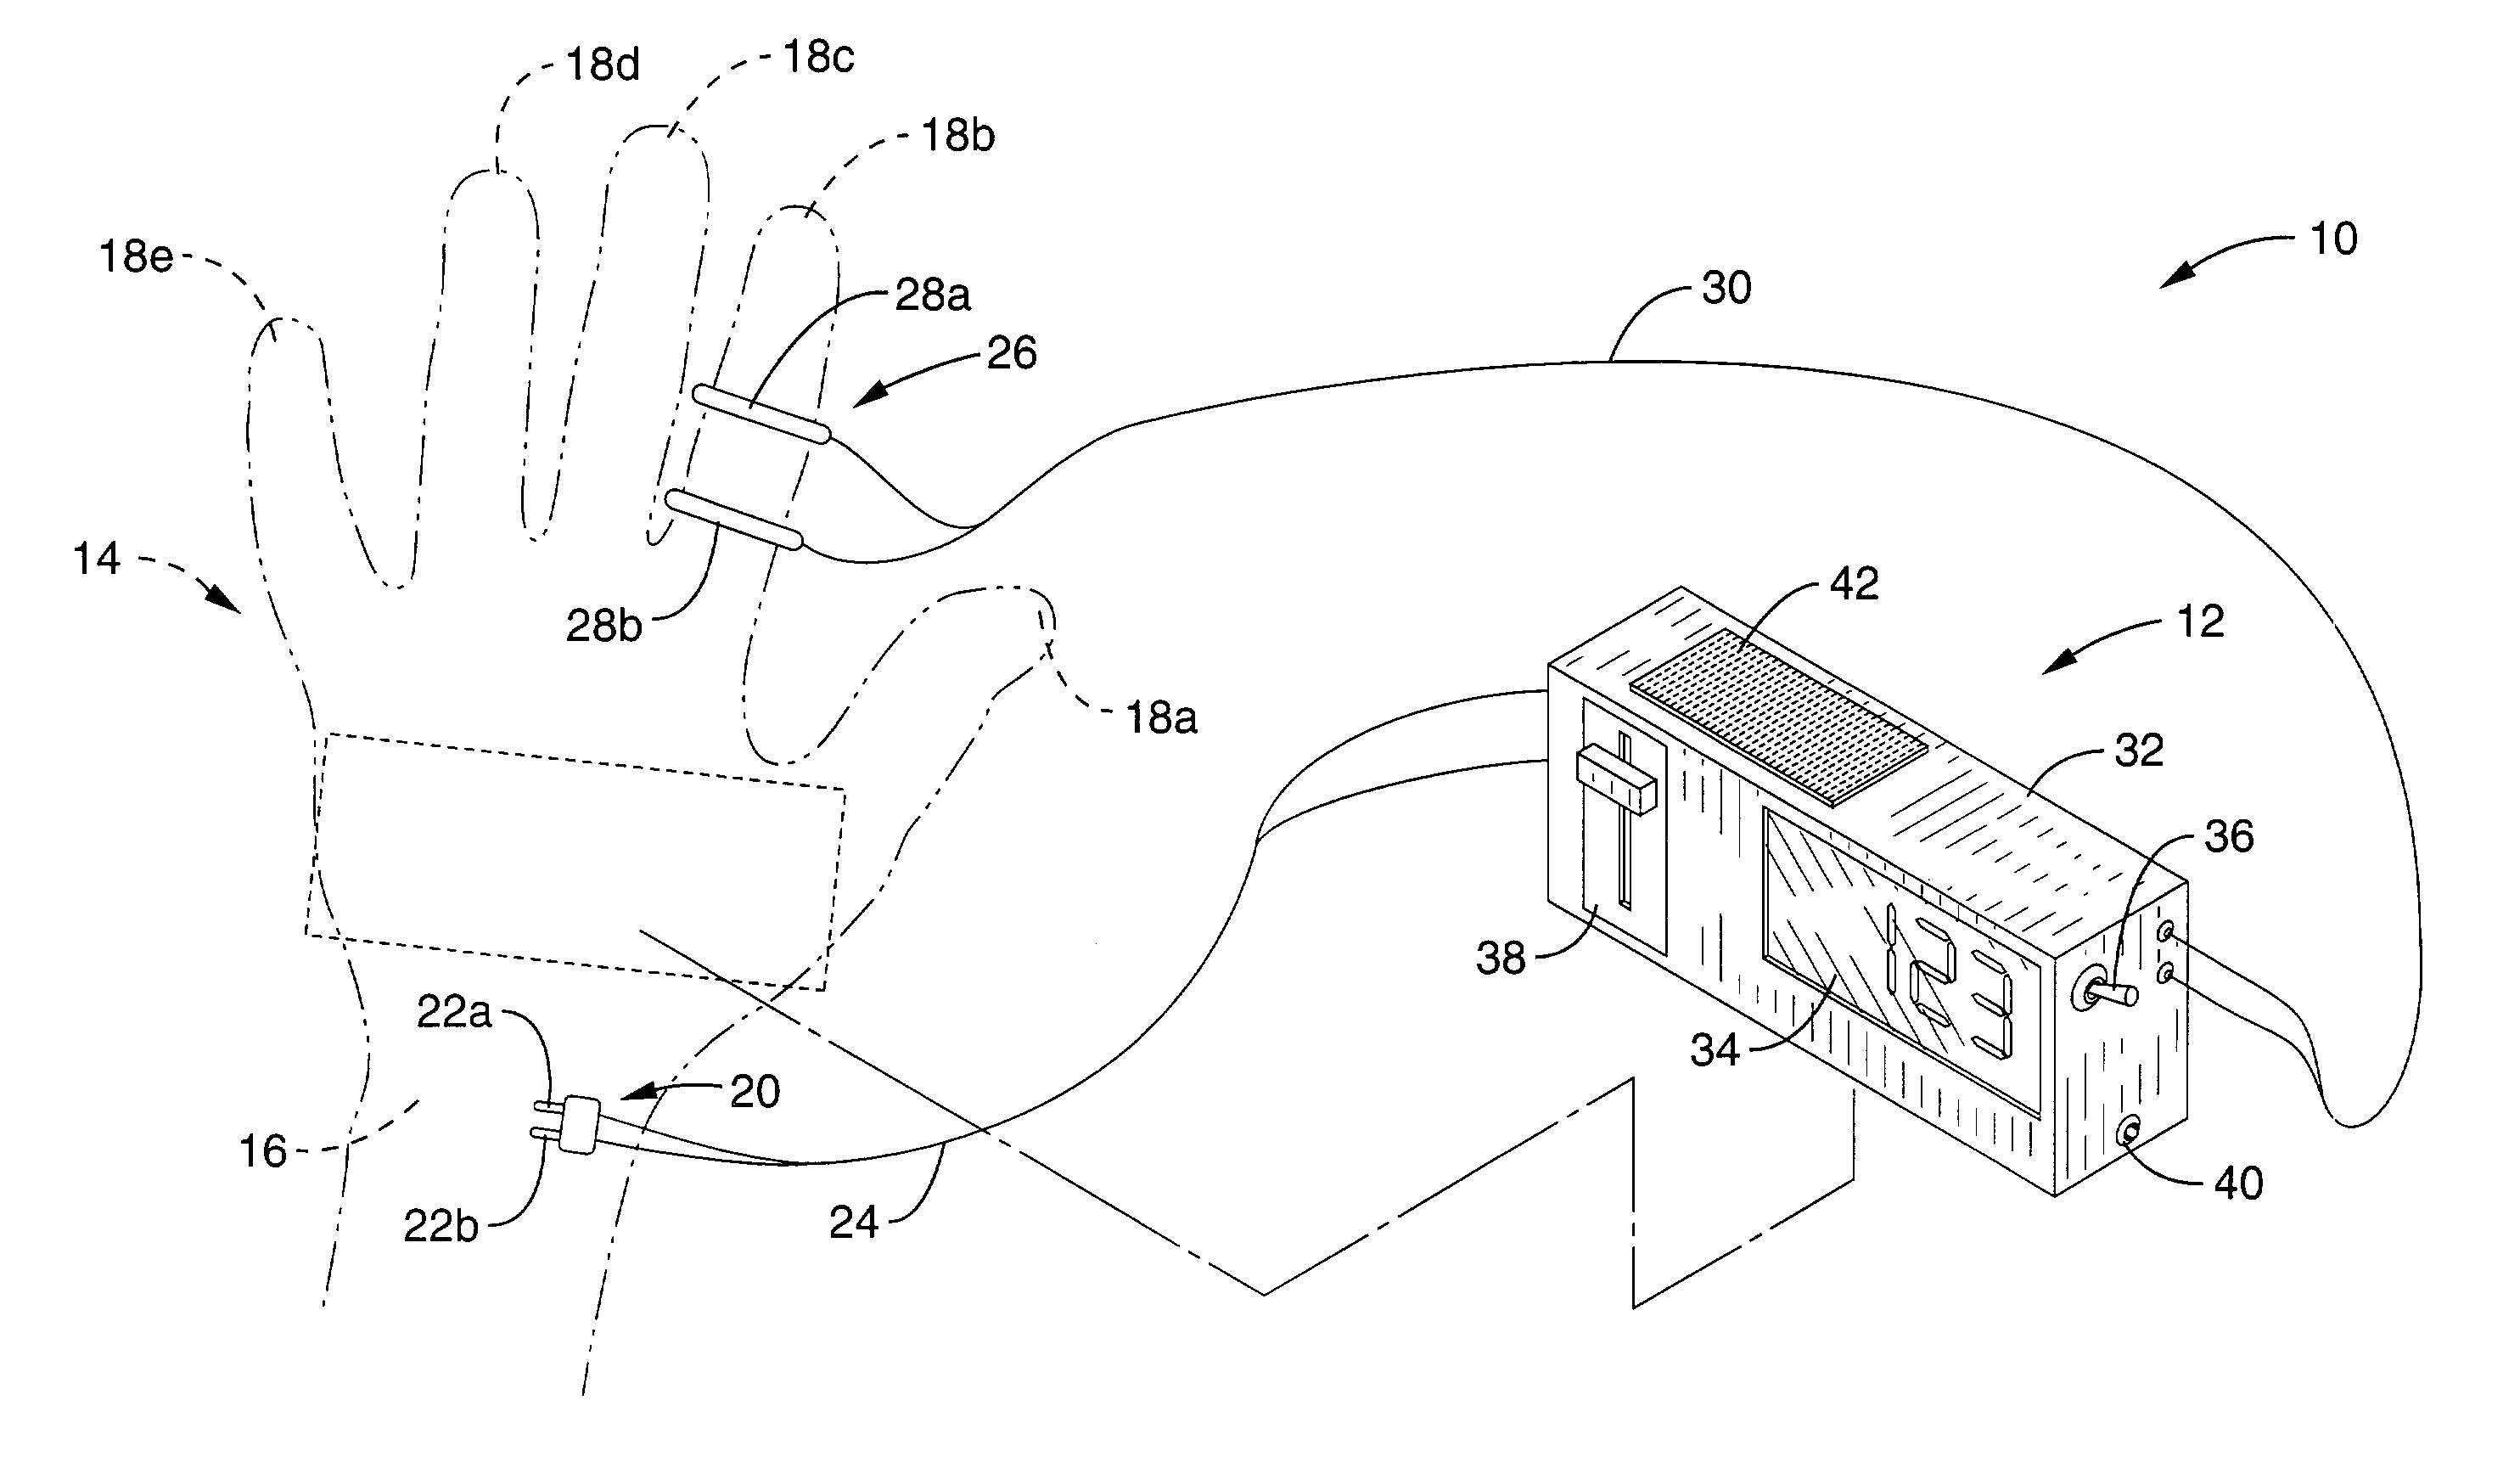 Method and apparatus for self-diagnostic evaluation of nerve sensory latency